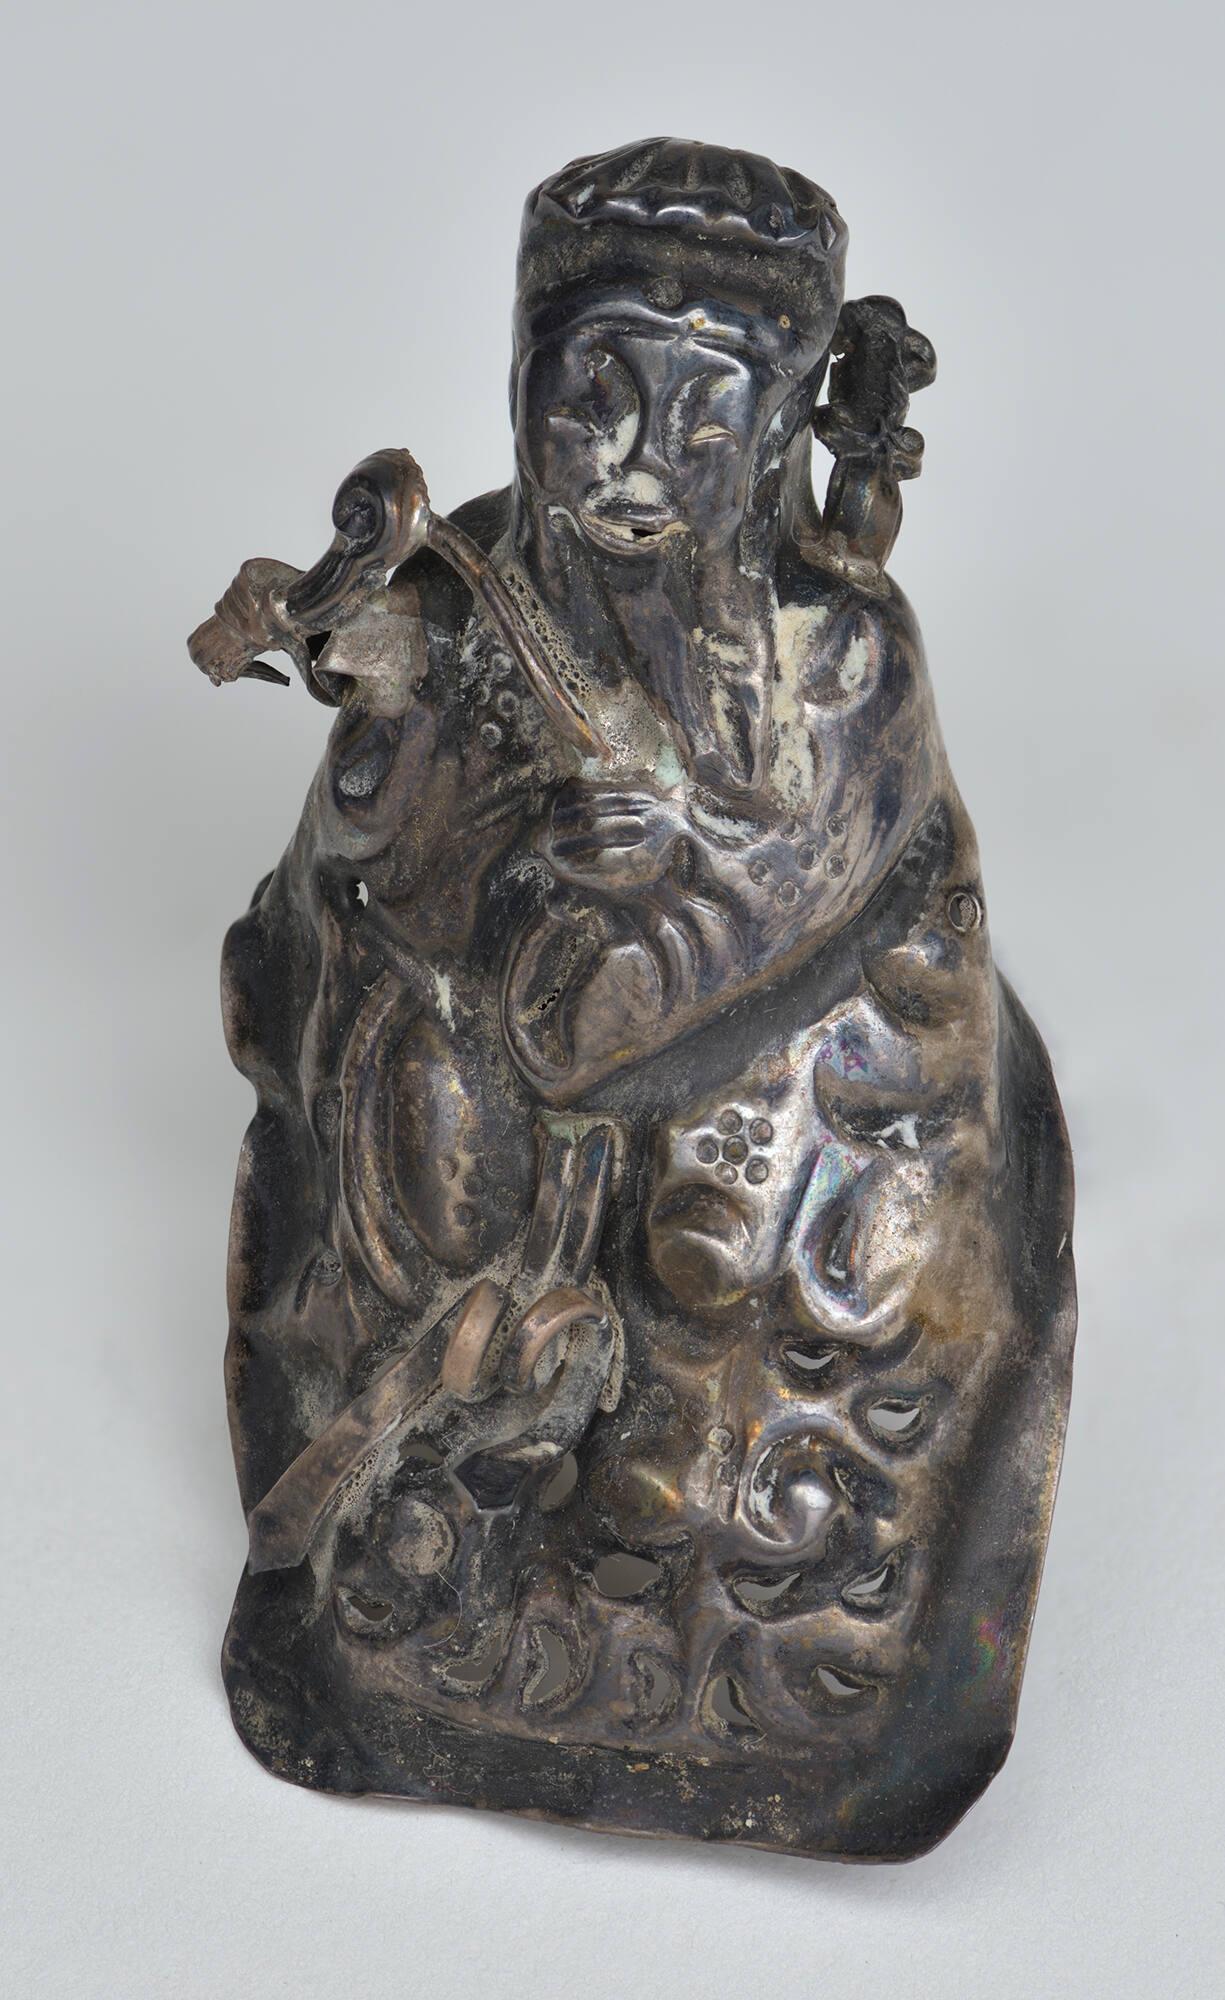 A tarnished silver object with a high relief design of a figure wearing a robe and headdress shown before conservation at the Isabella Stewart Gardner Museum.